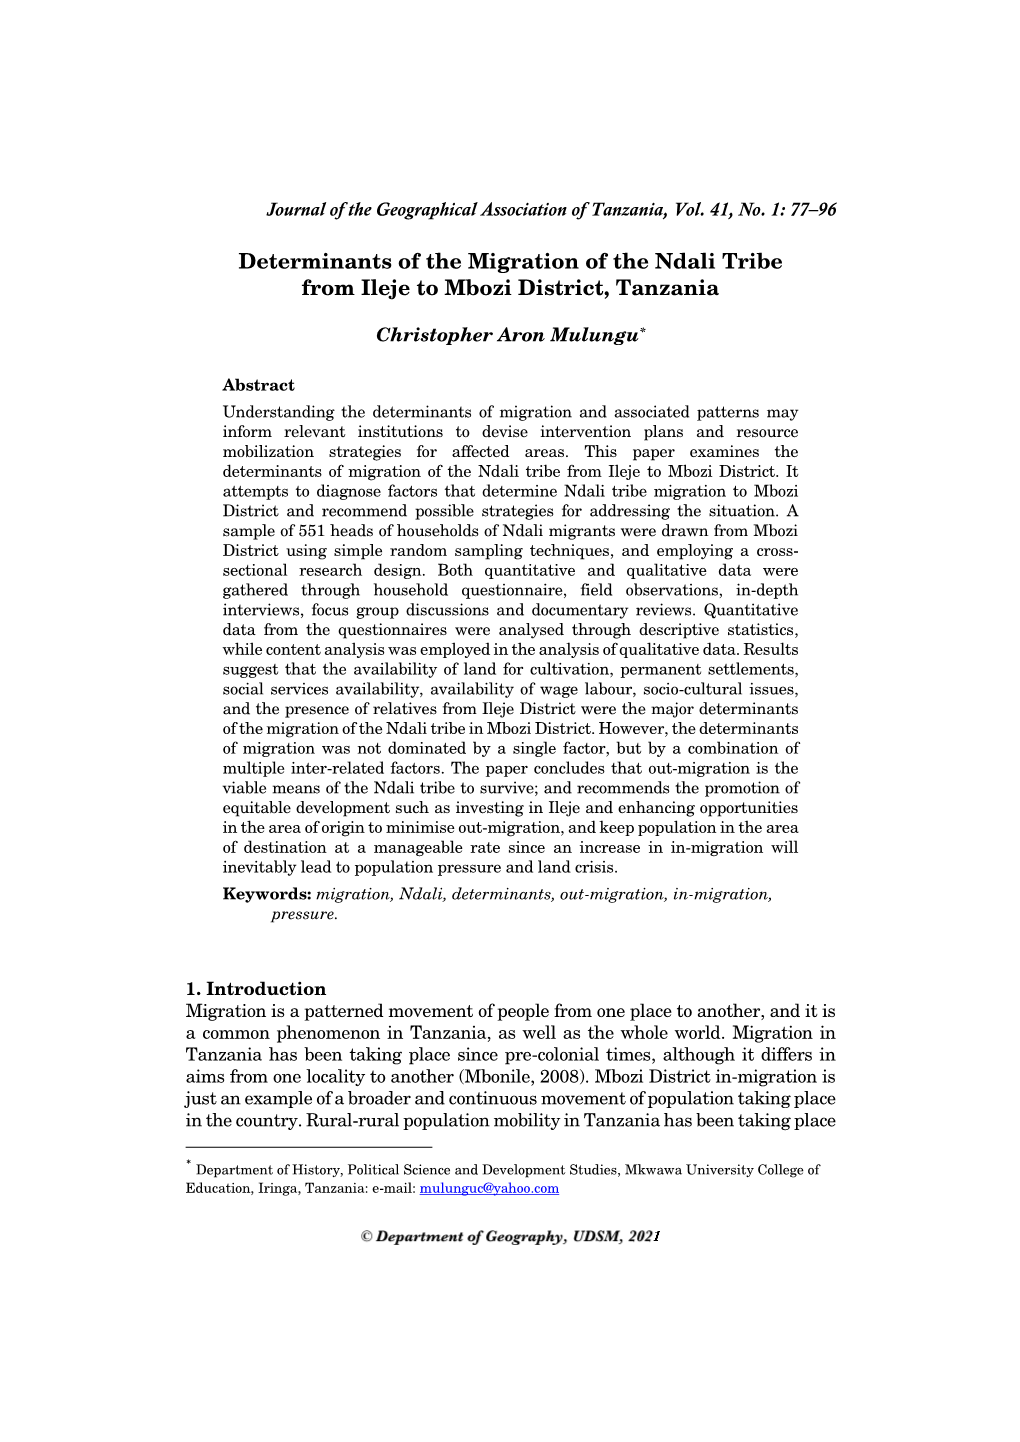 Determinants of the Migration of the Ndali Tribe from Ileje to Mbozi District, Tanzania